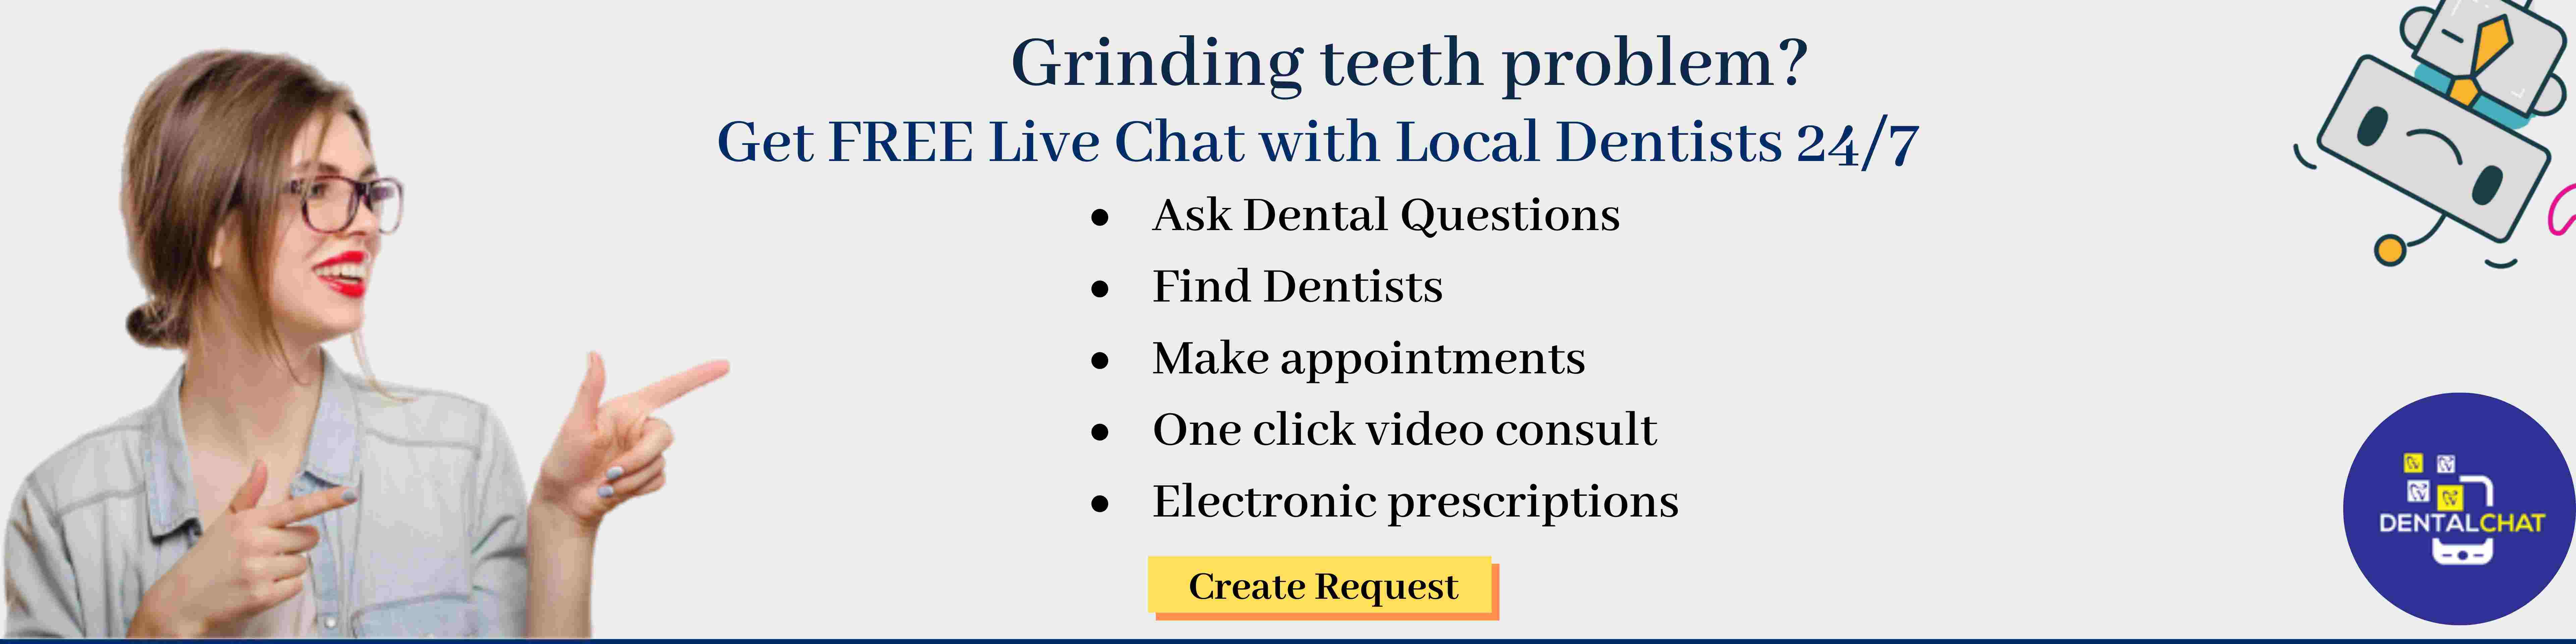 Teeth grinding chat, bruxism question blog, online teeth grinding chat